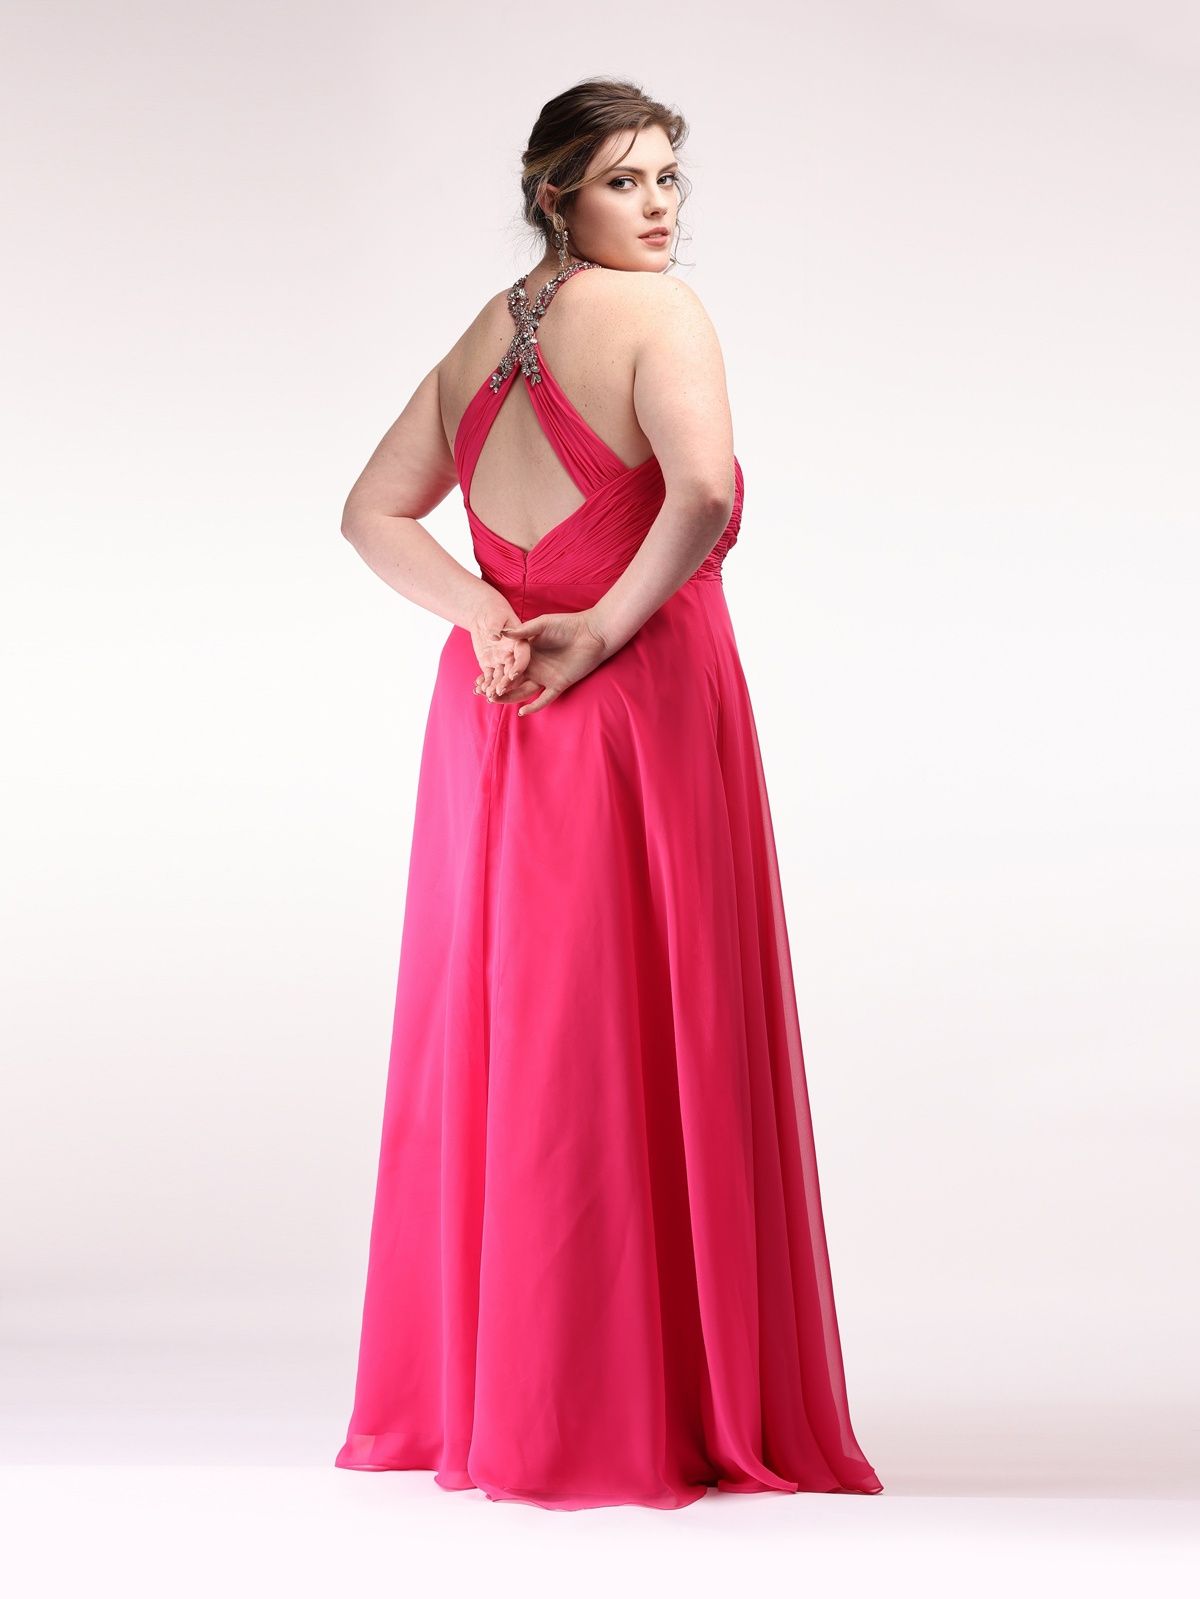 Style Makayla Socialite Fashions Plus Size 18 Prom Halter Sequined Hot Pink Floor Length Maxi on Queenly